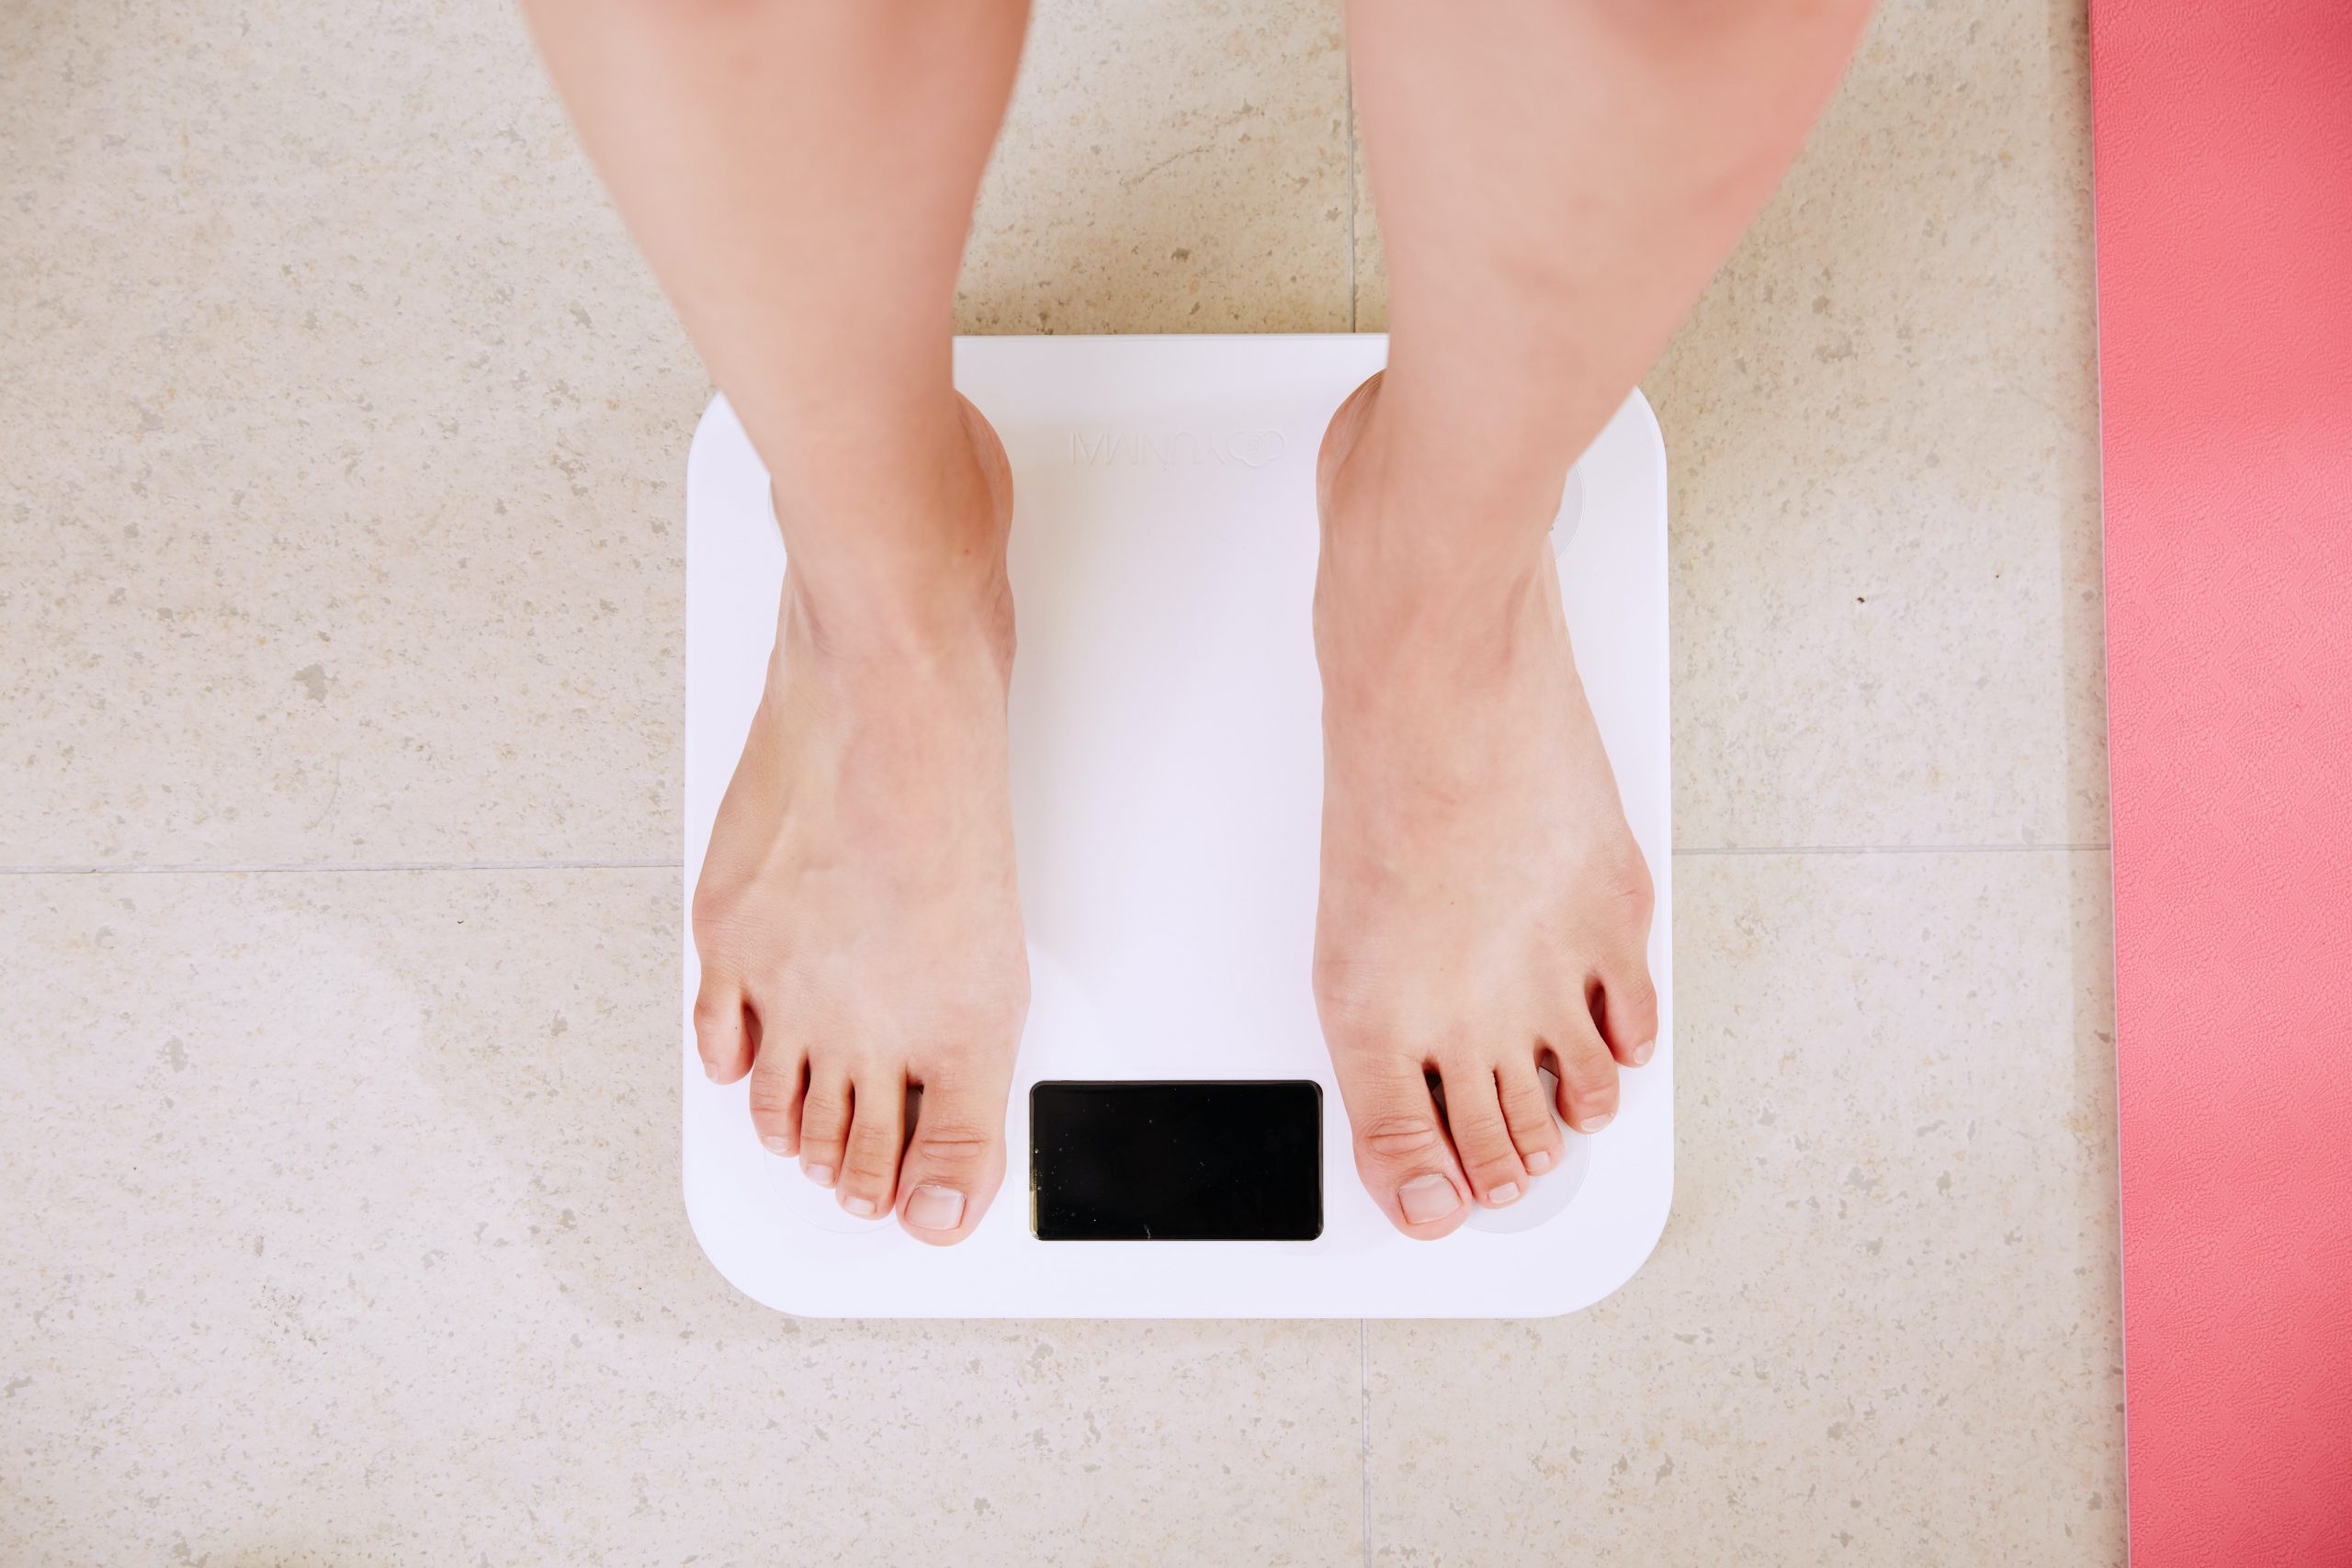 Emotional Eating and the Drama Around Weight and Body Image